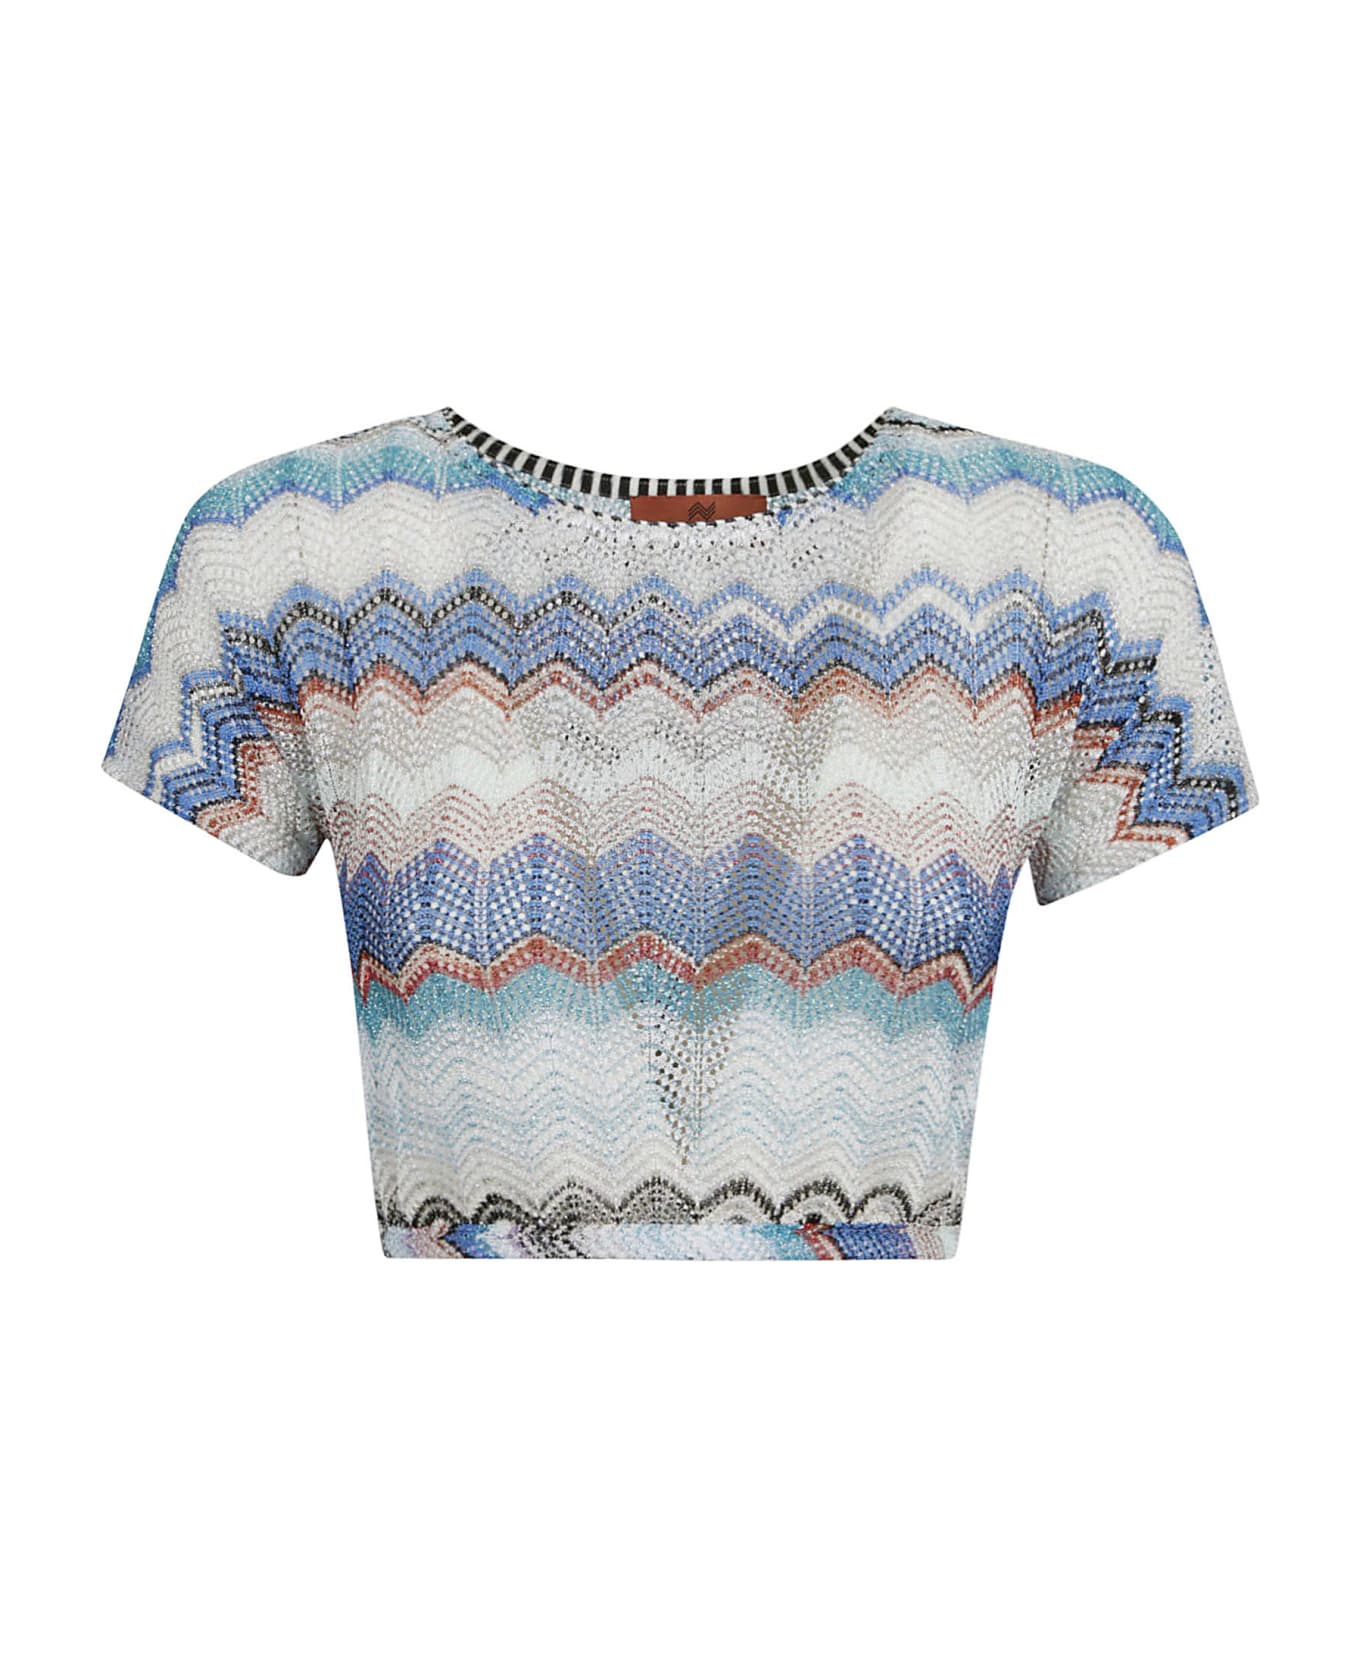 Missoni Zig-zag Stripe Patterned Cropped Top - Multicolor トップス